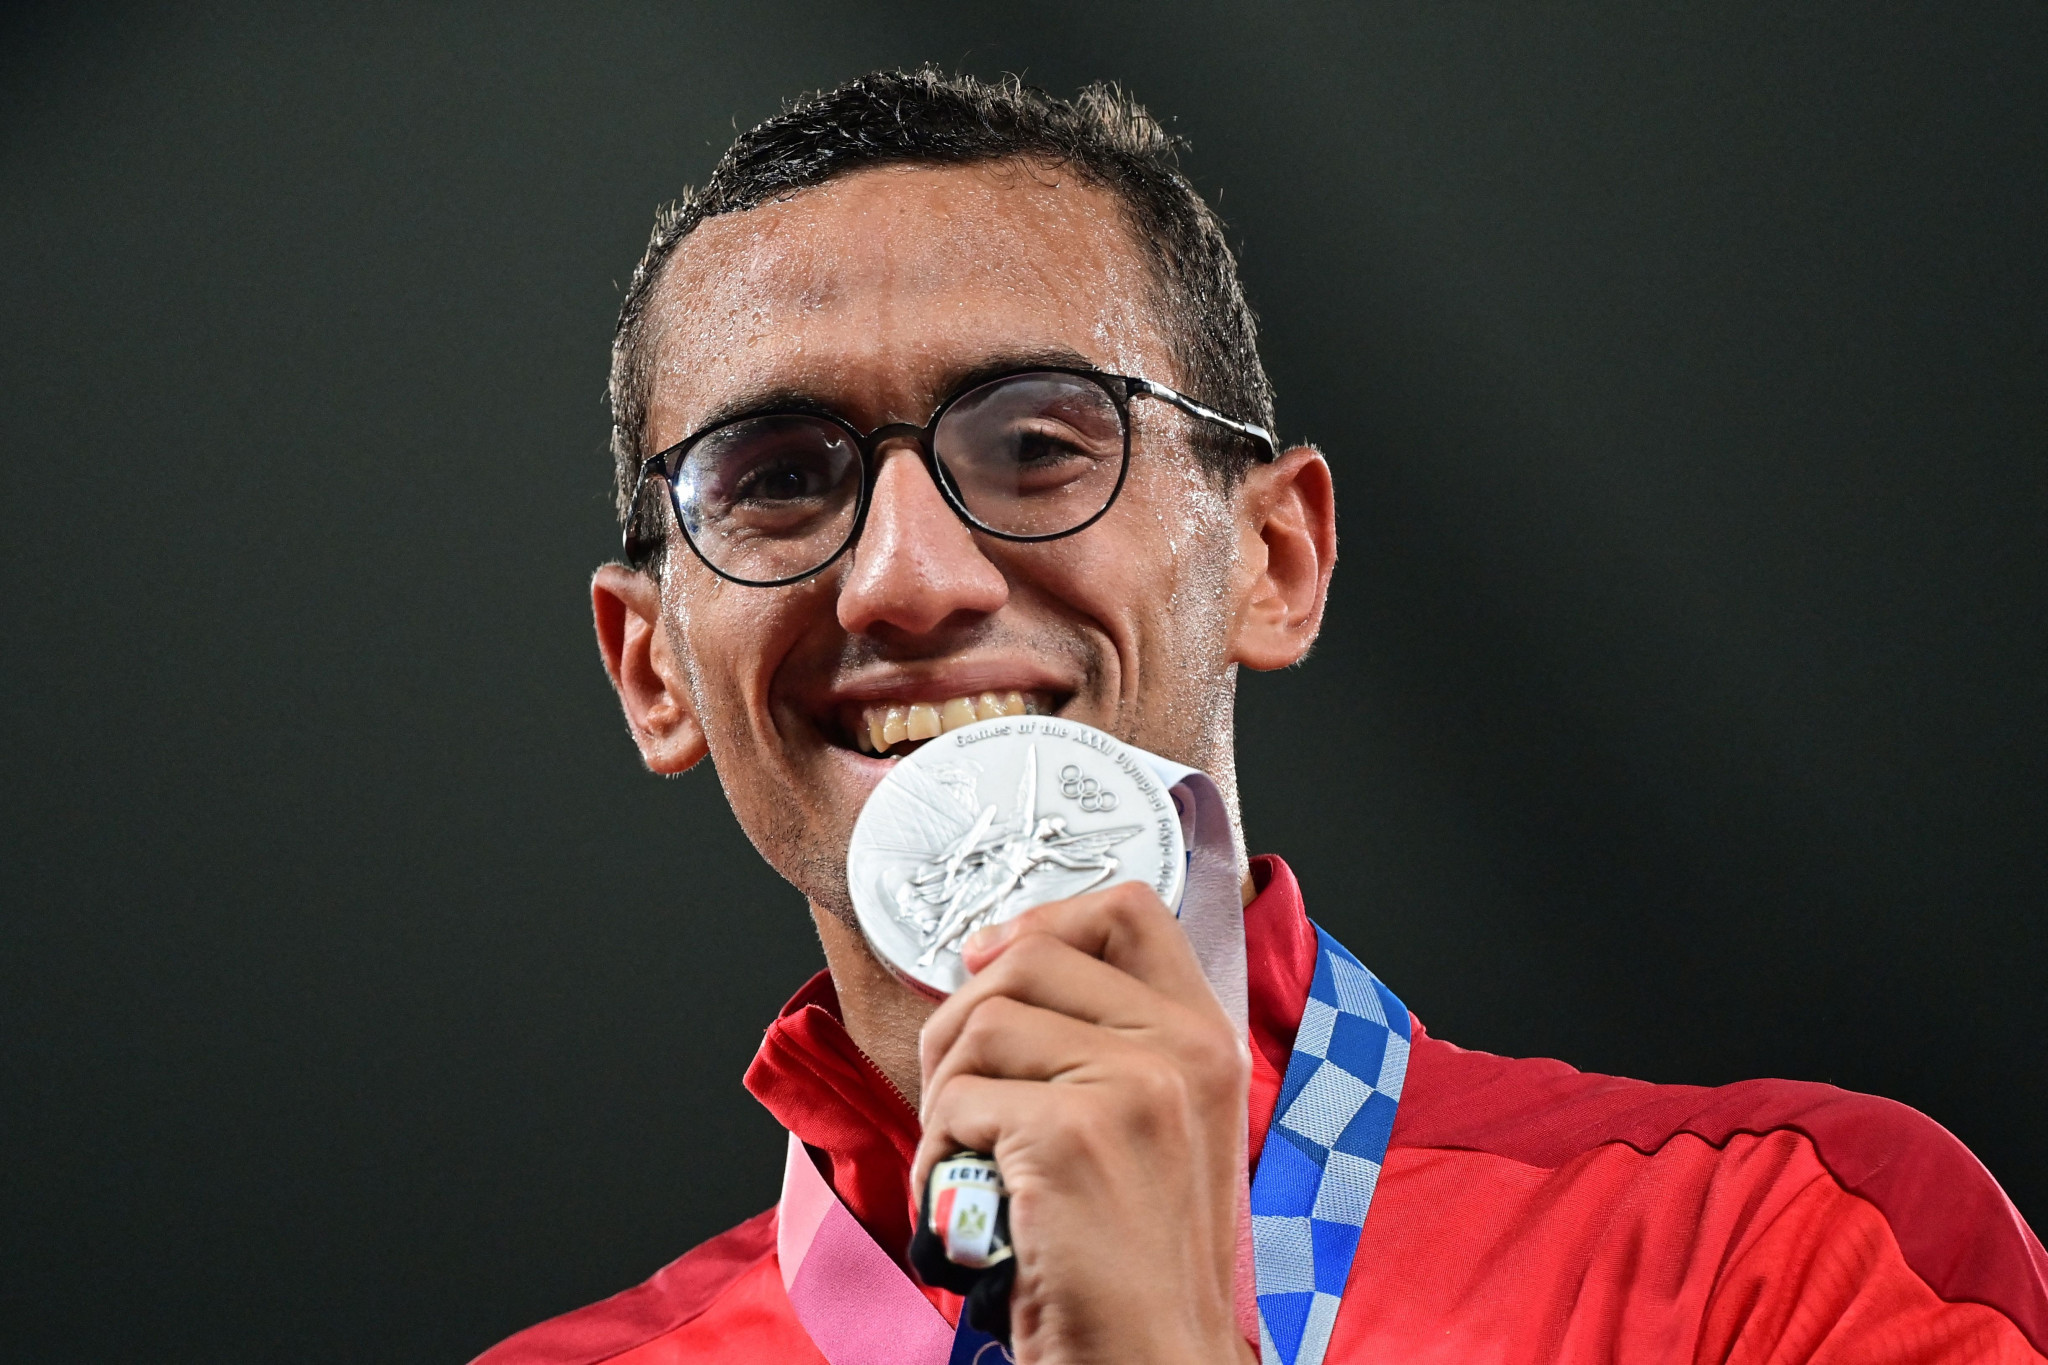 Tokyo 2020 Olympic silver medallist Ahmed Elgendy of Egypt was among those who finished on the podium in the fist edition of the event in 2018 ©Getty Images